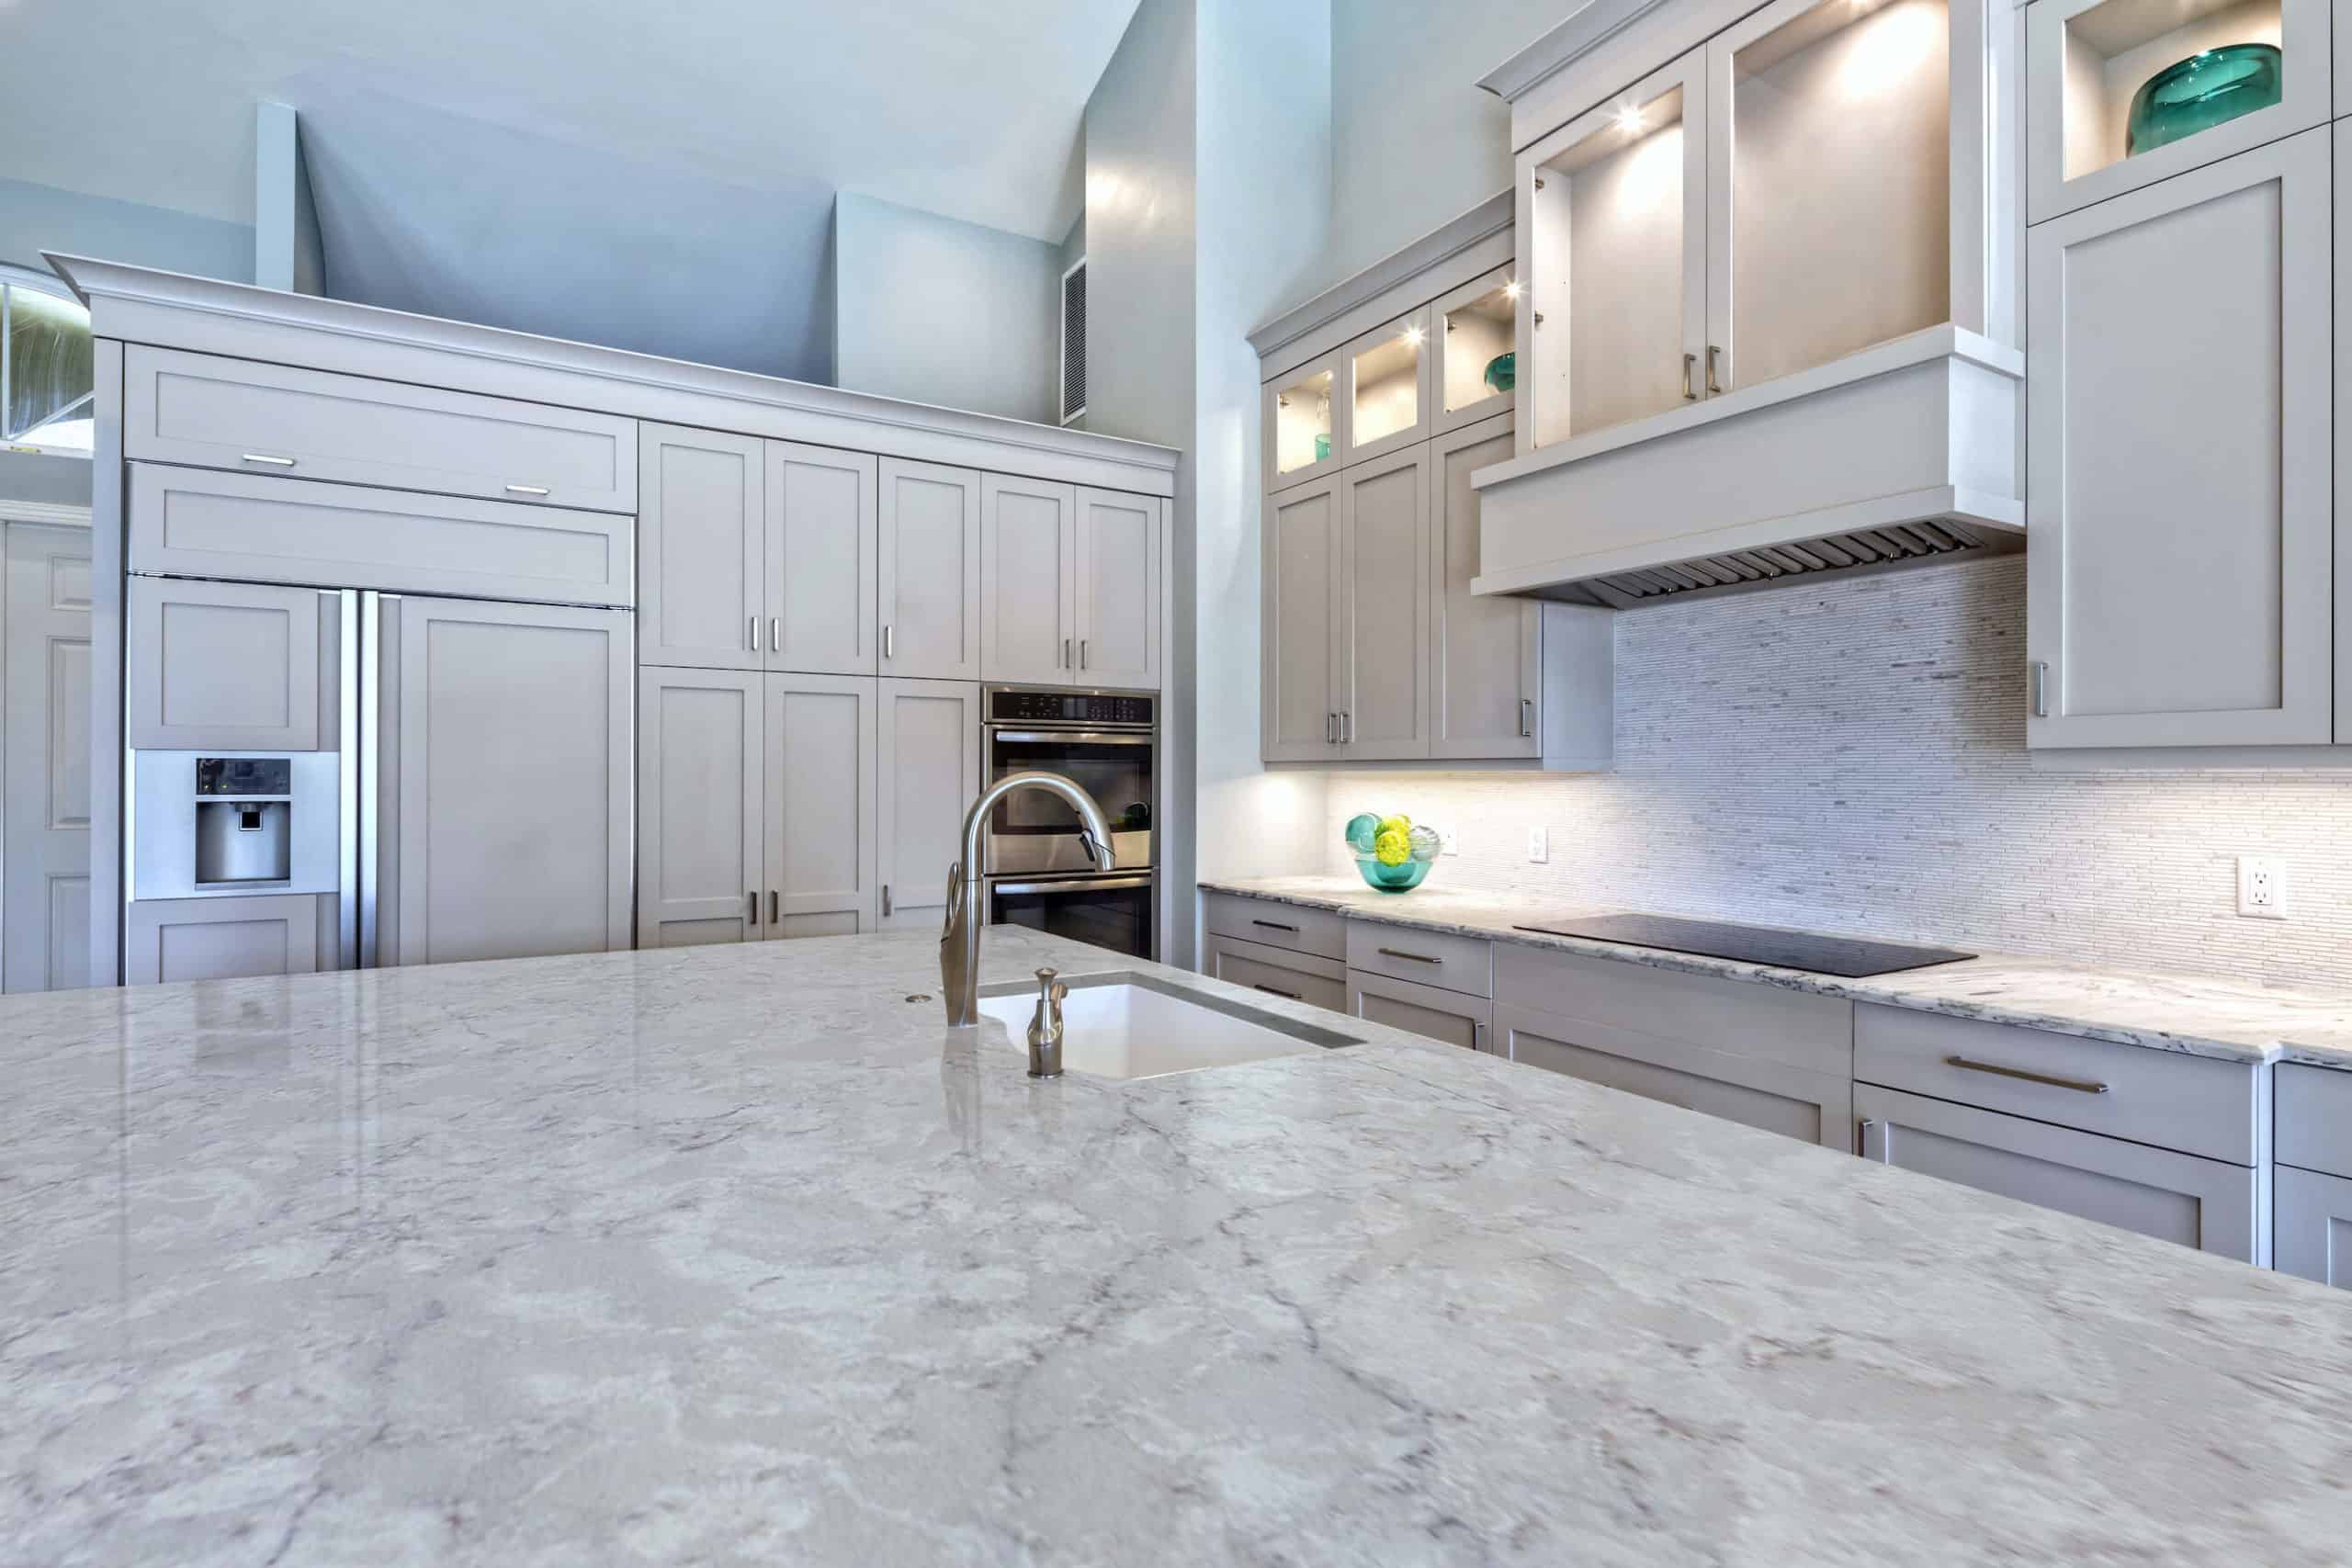 How To Clean Quartz Kitchen And, How To Disinfect Cambria Quartz Countertops